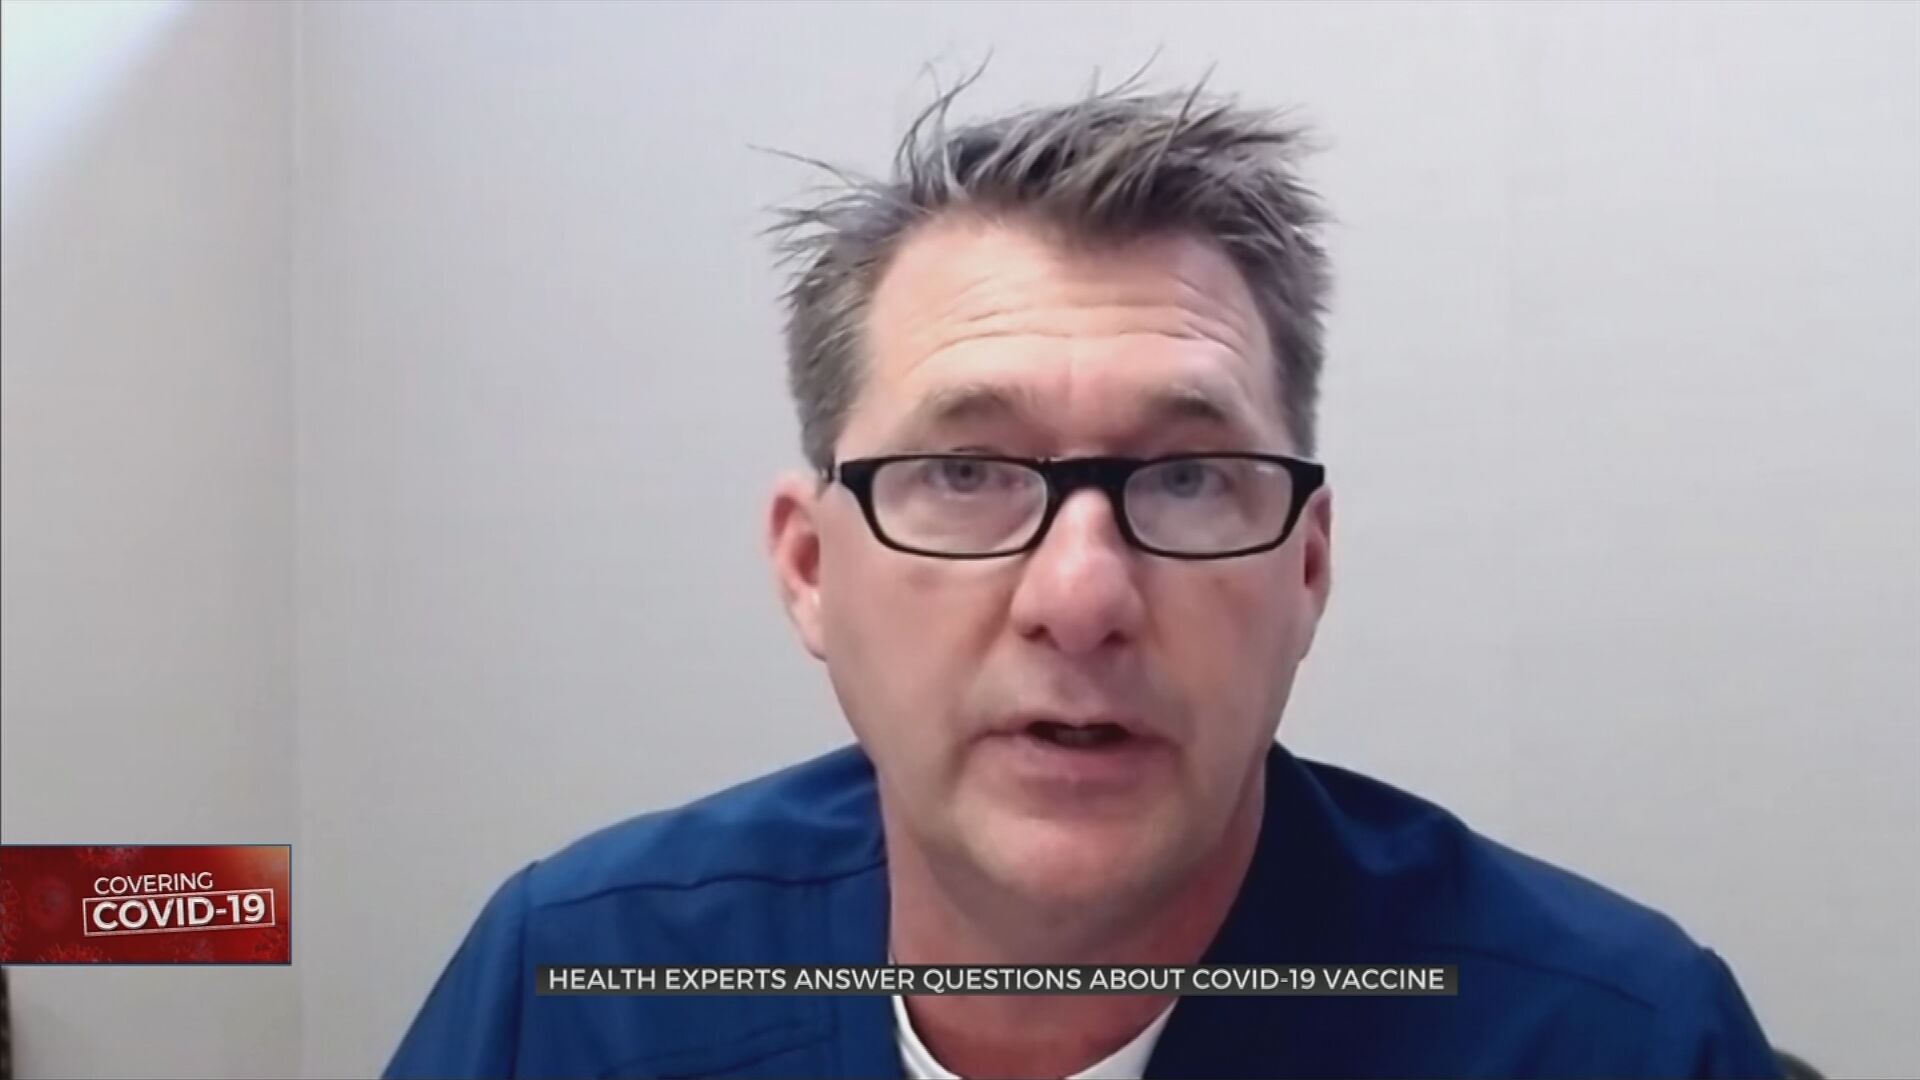 Oklahoma Healthcare Experts Address Questions About COVID-19 Vaccine 